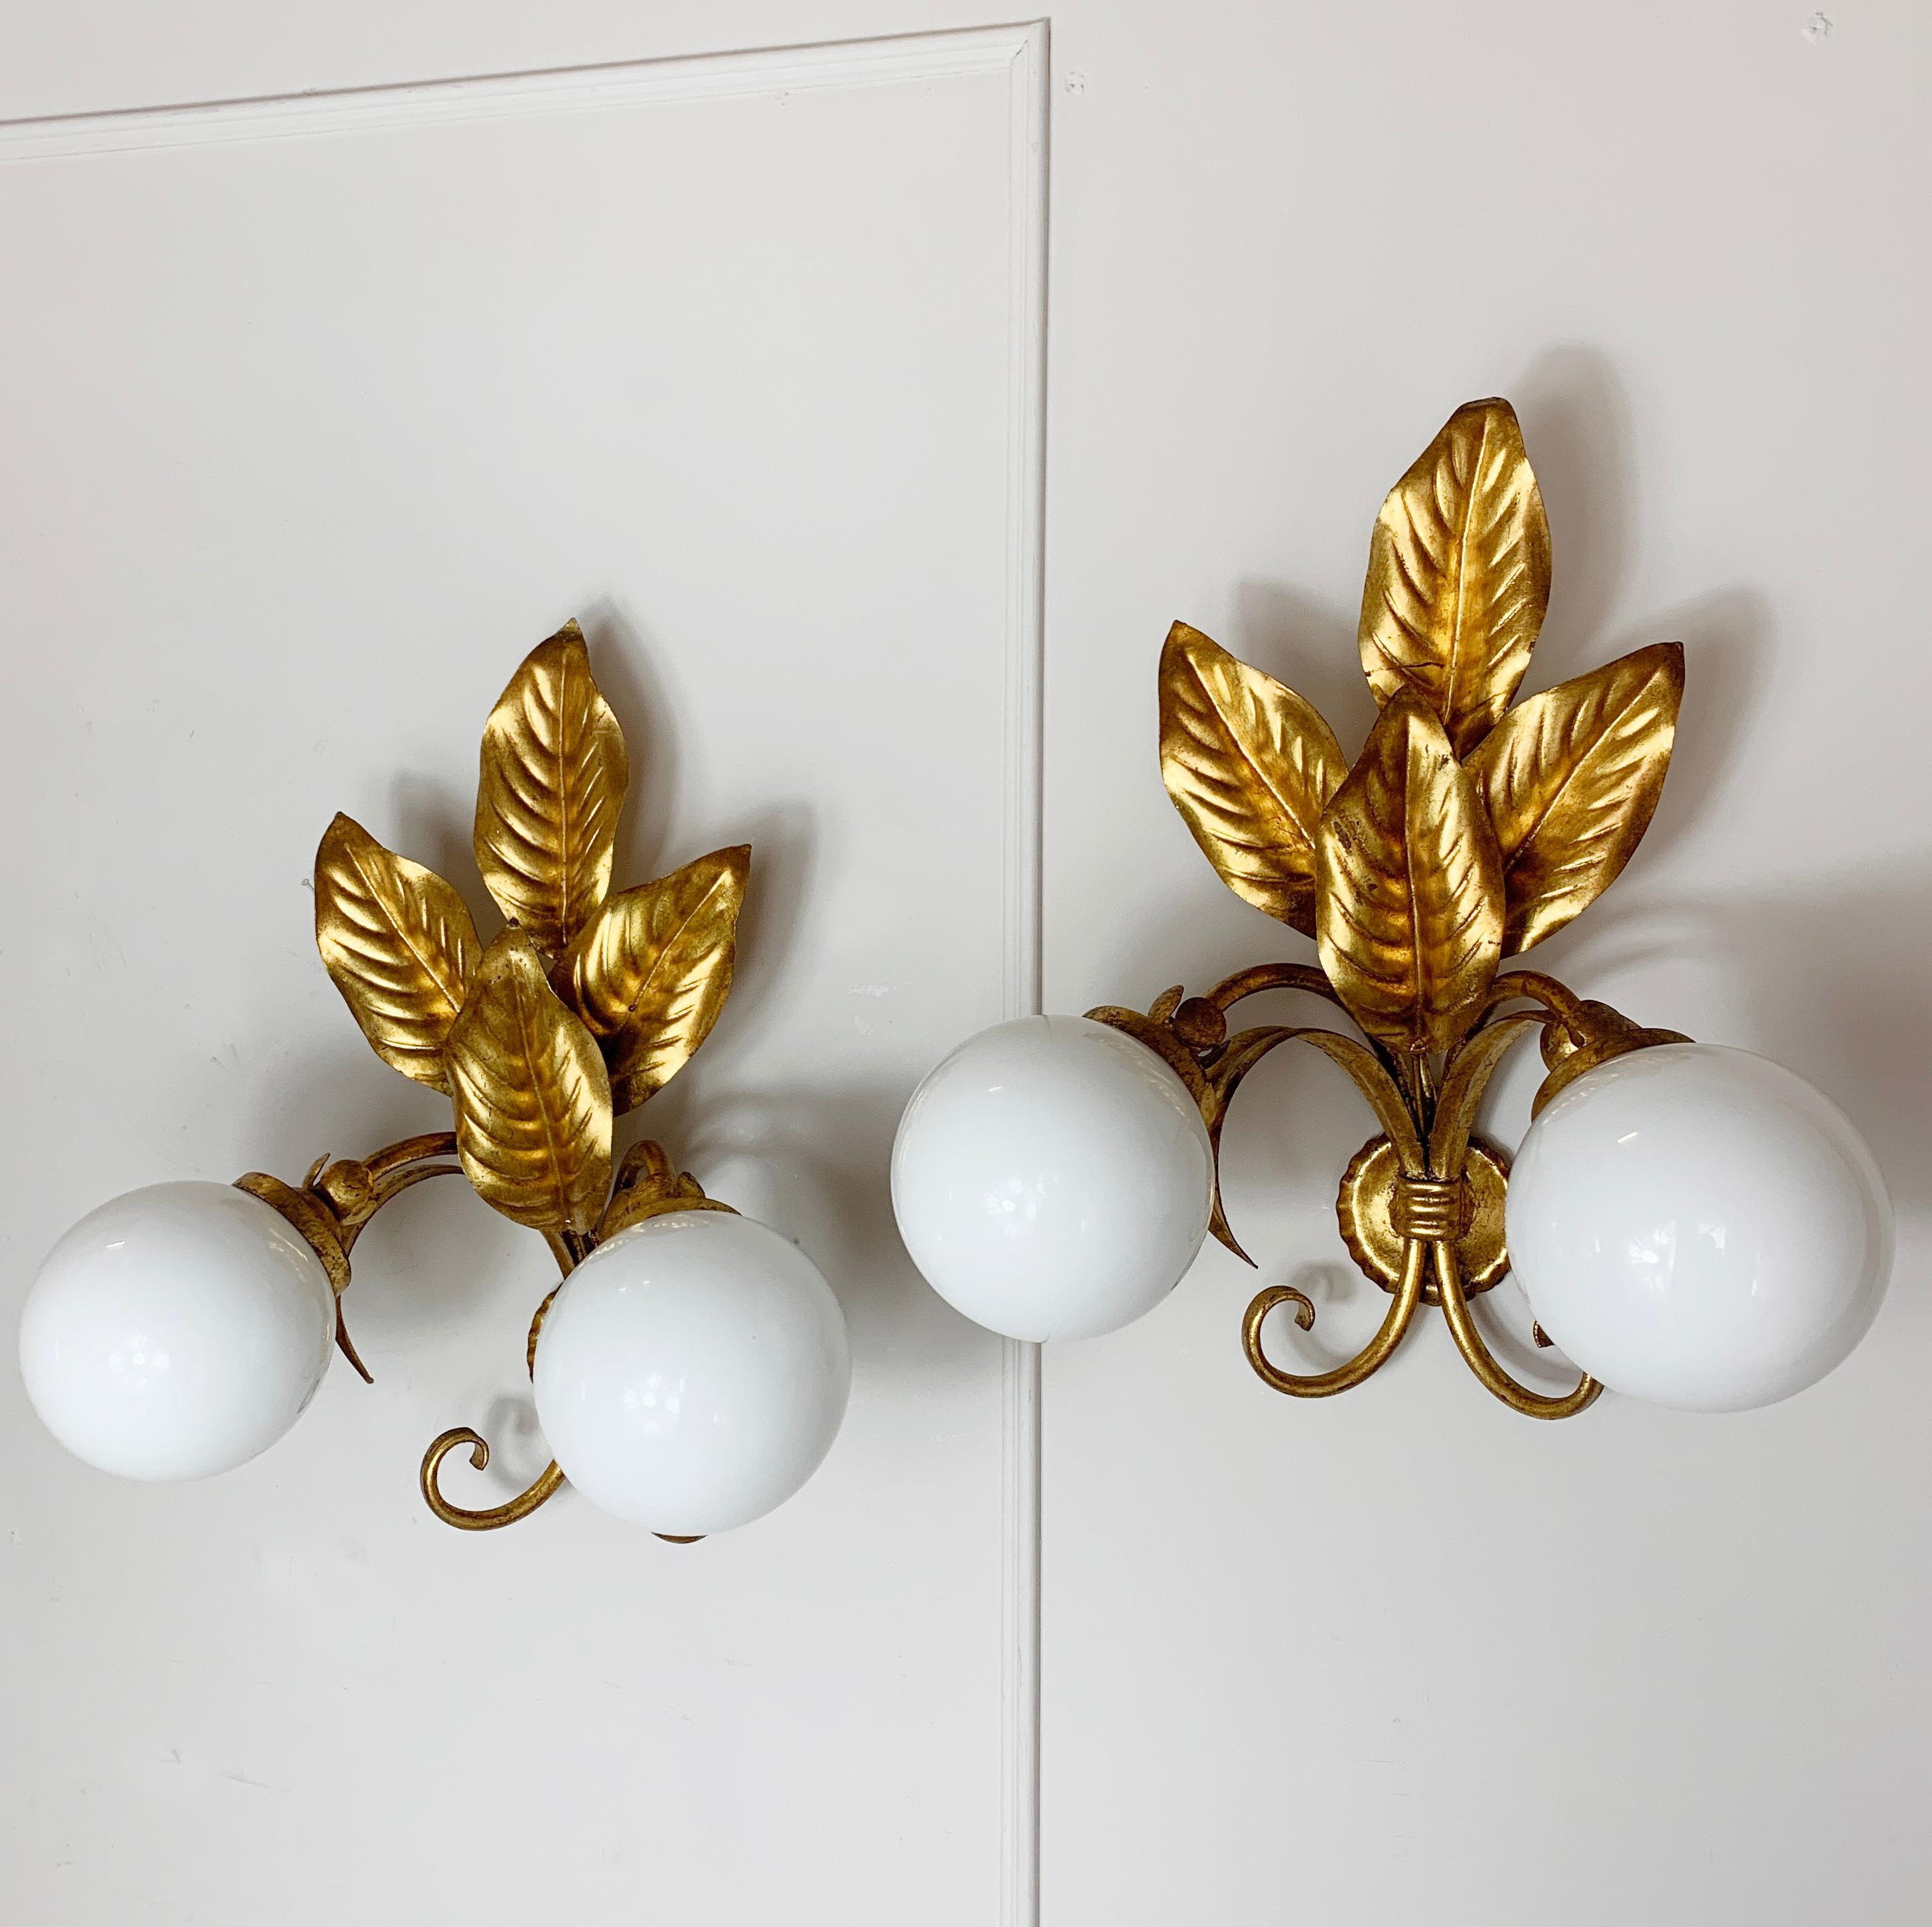 1950s French Feuilles D’or wall lights
Stunning pair of gilt finished, double wall lights, with opaque glass full globe shade
These look beautiful on or off, and when illuminated give off a wonderful glow
Made in France in the 1950s these lights